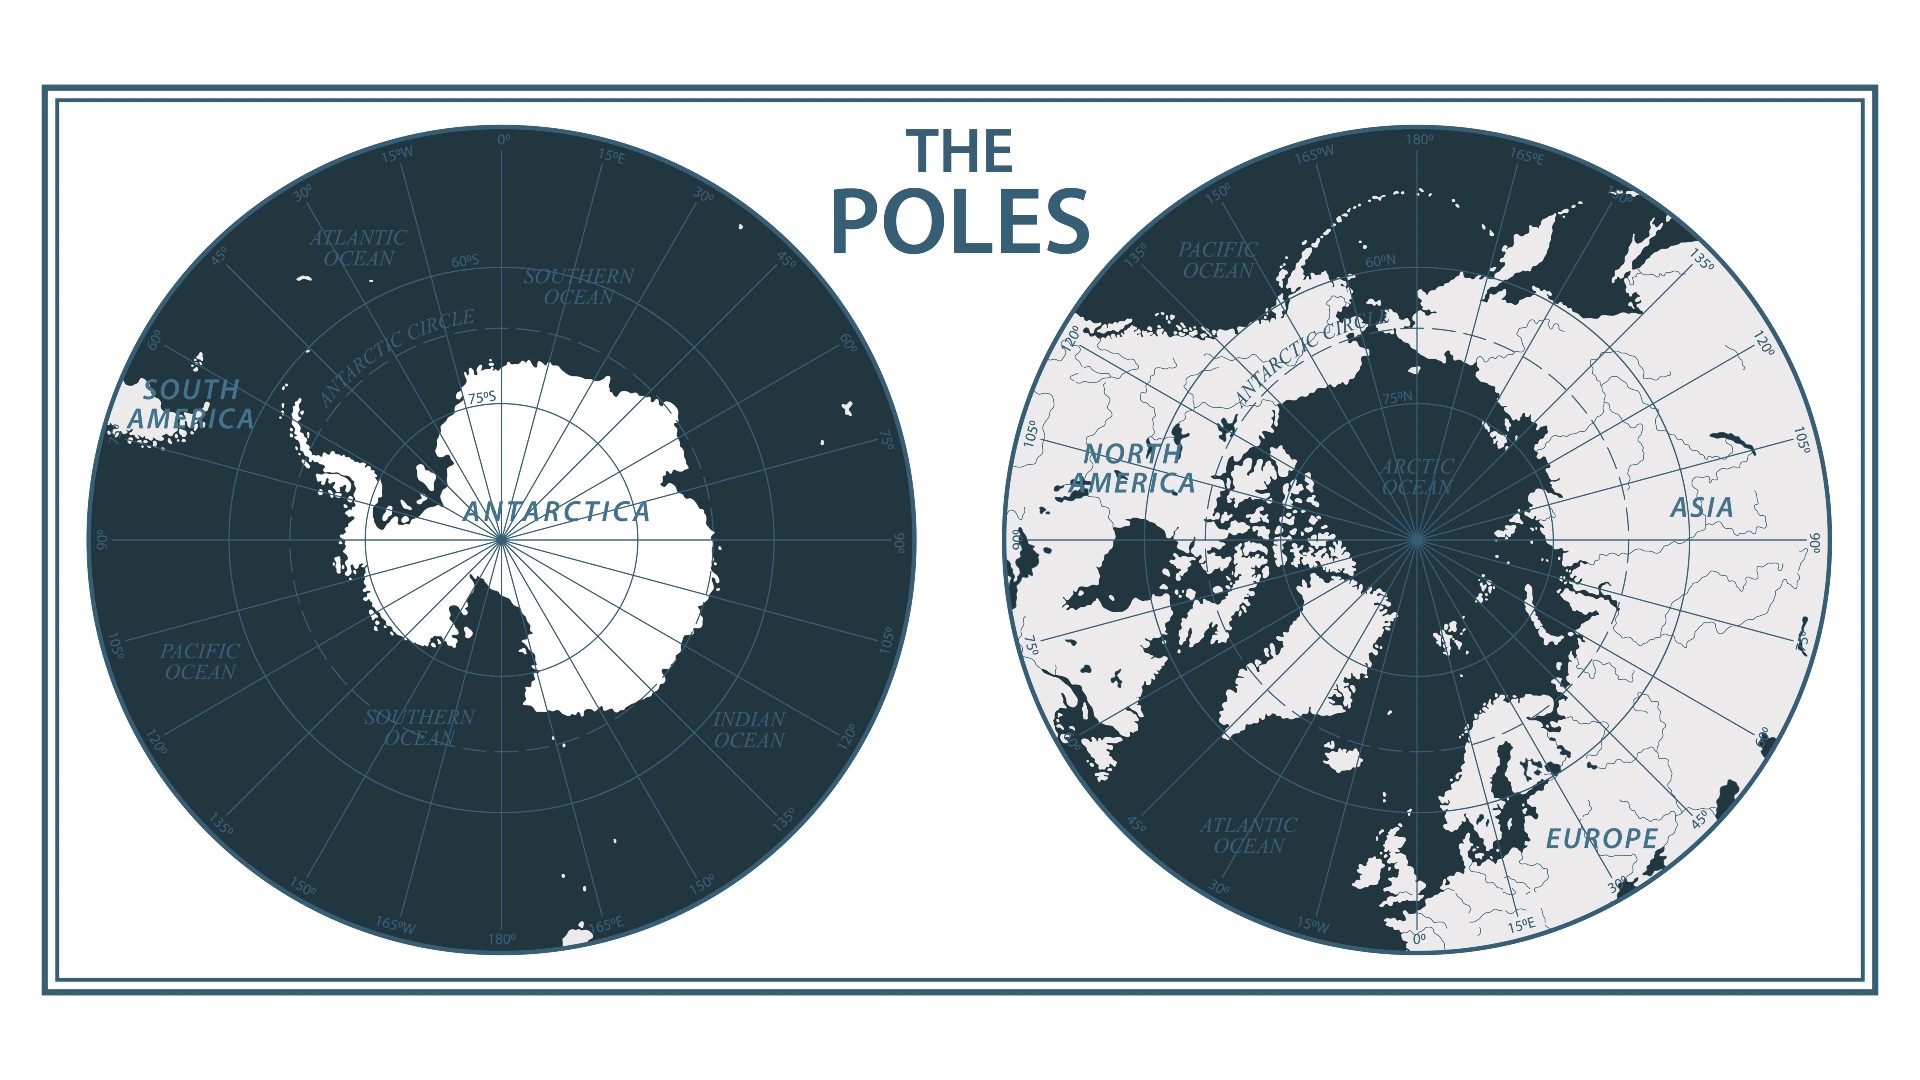 Two black and white maps side by side comparing the North Pole and the South Pole.